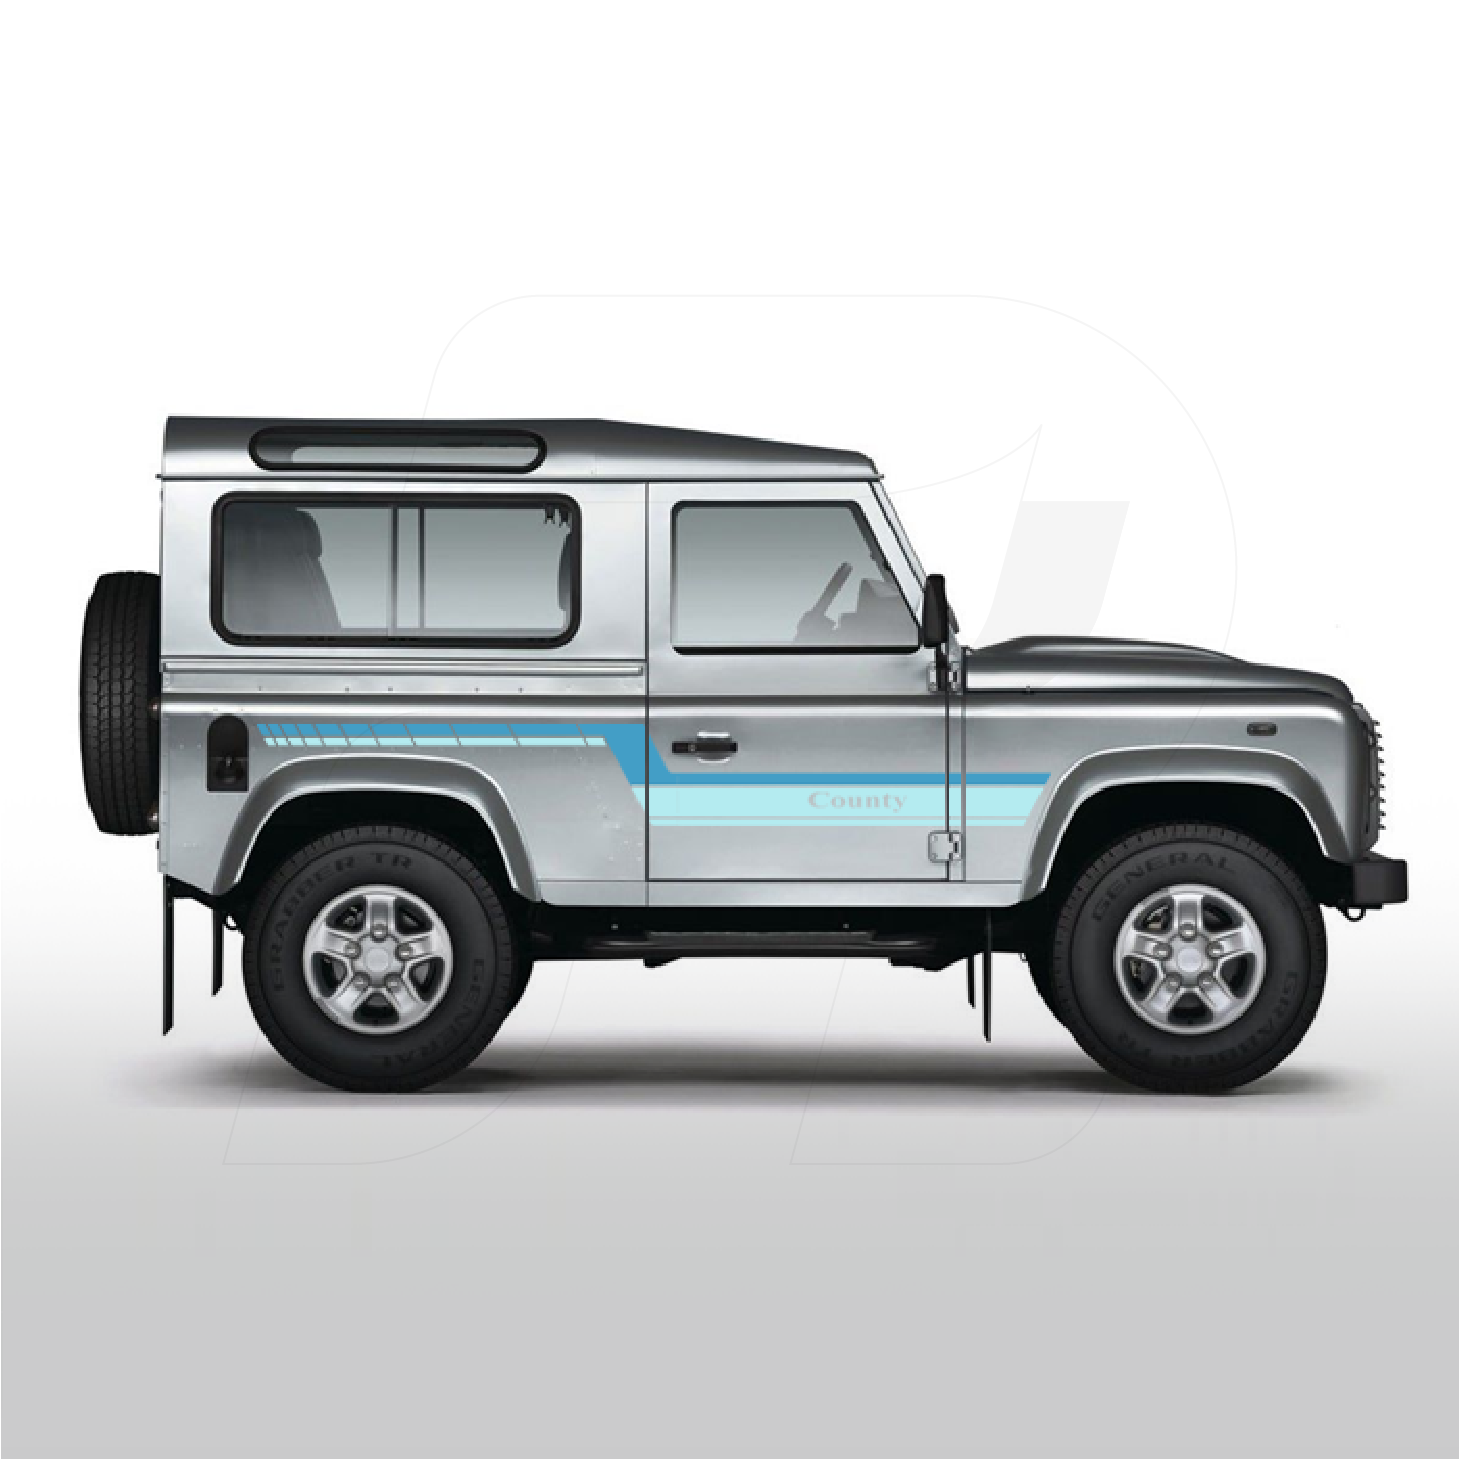 Land Rover Defender 90 County